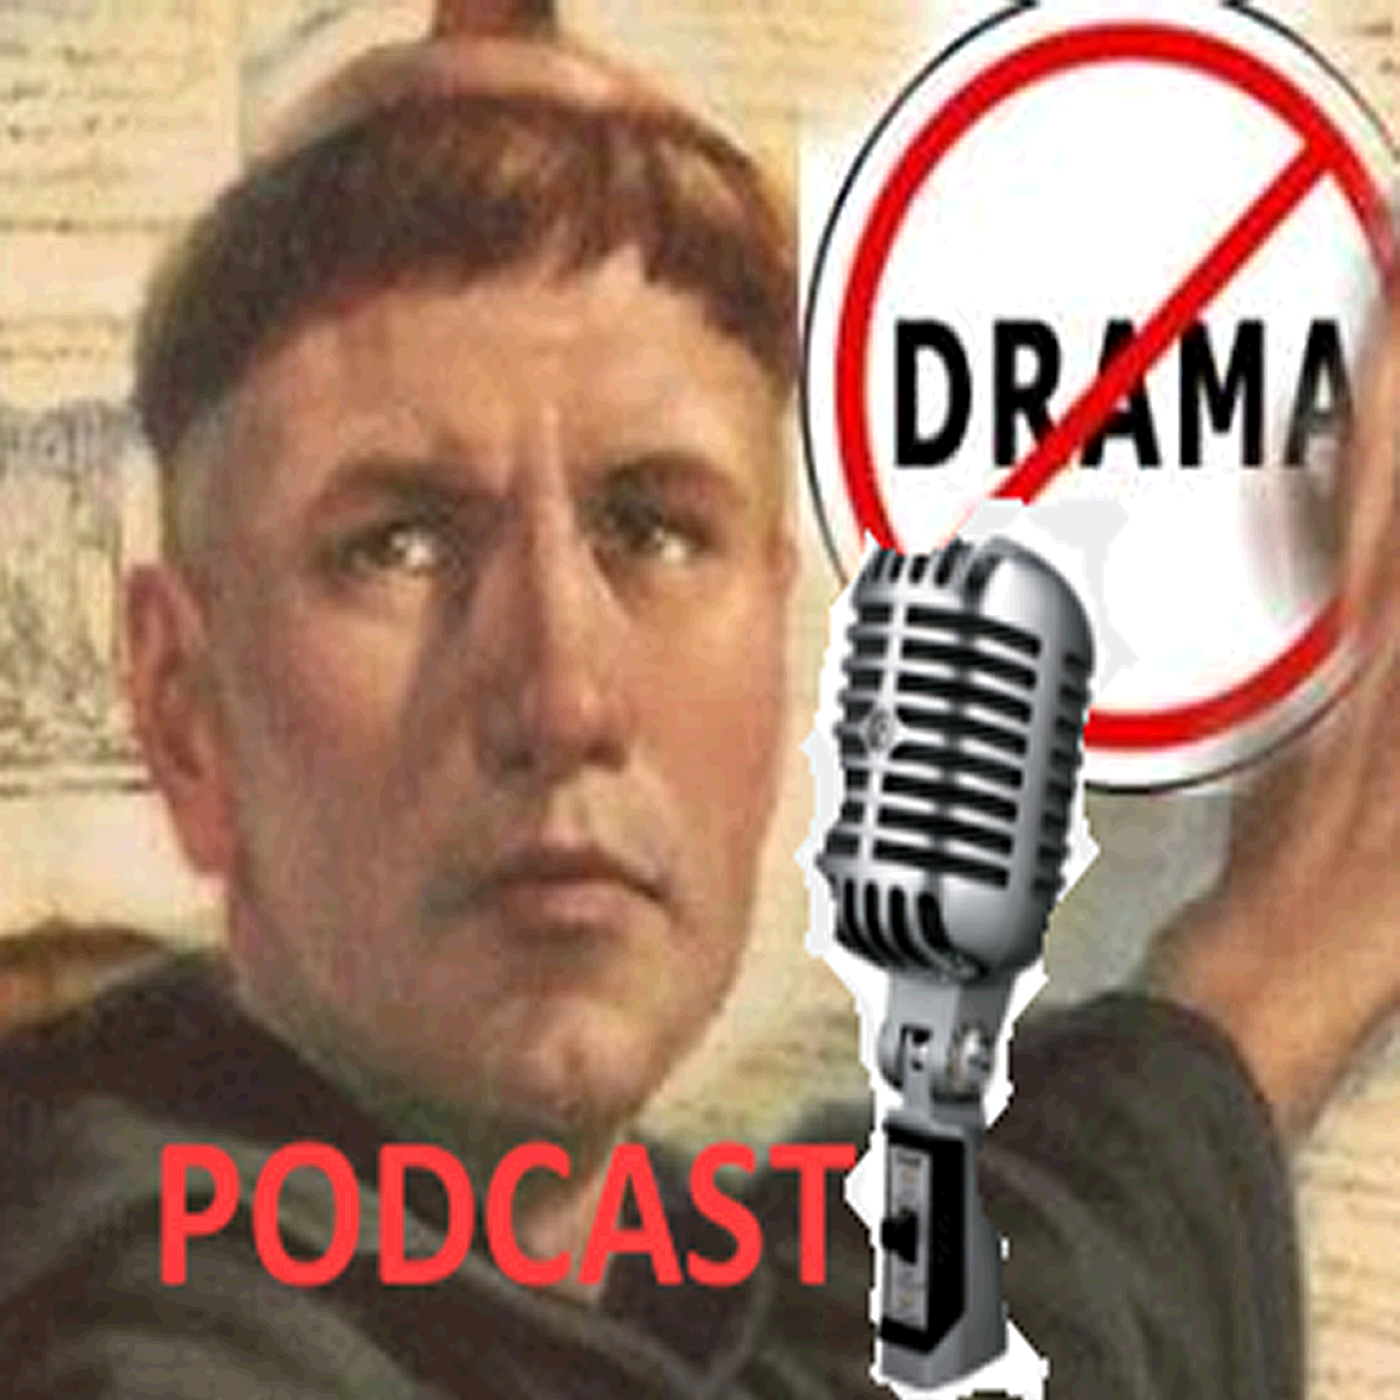 NO DRAMA Podcast - Episode 17: Romans 12:9-20 ”How serious is St. Paul?”